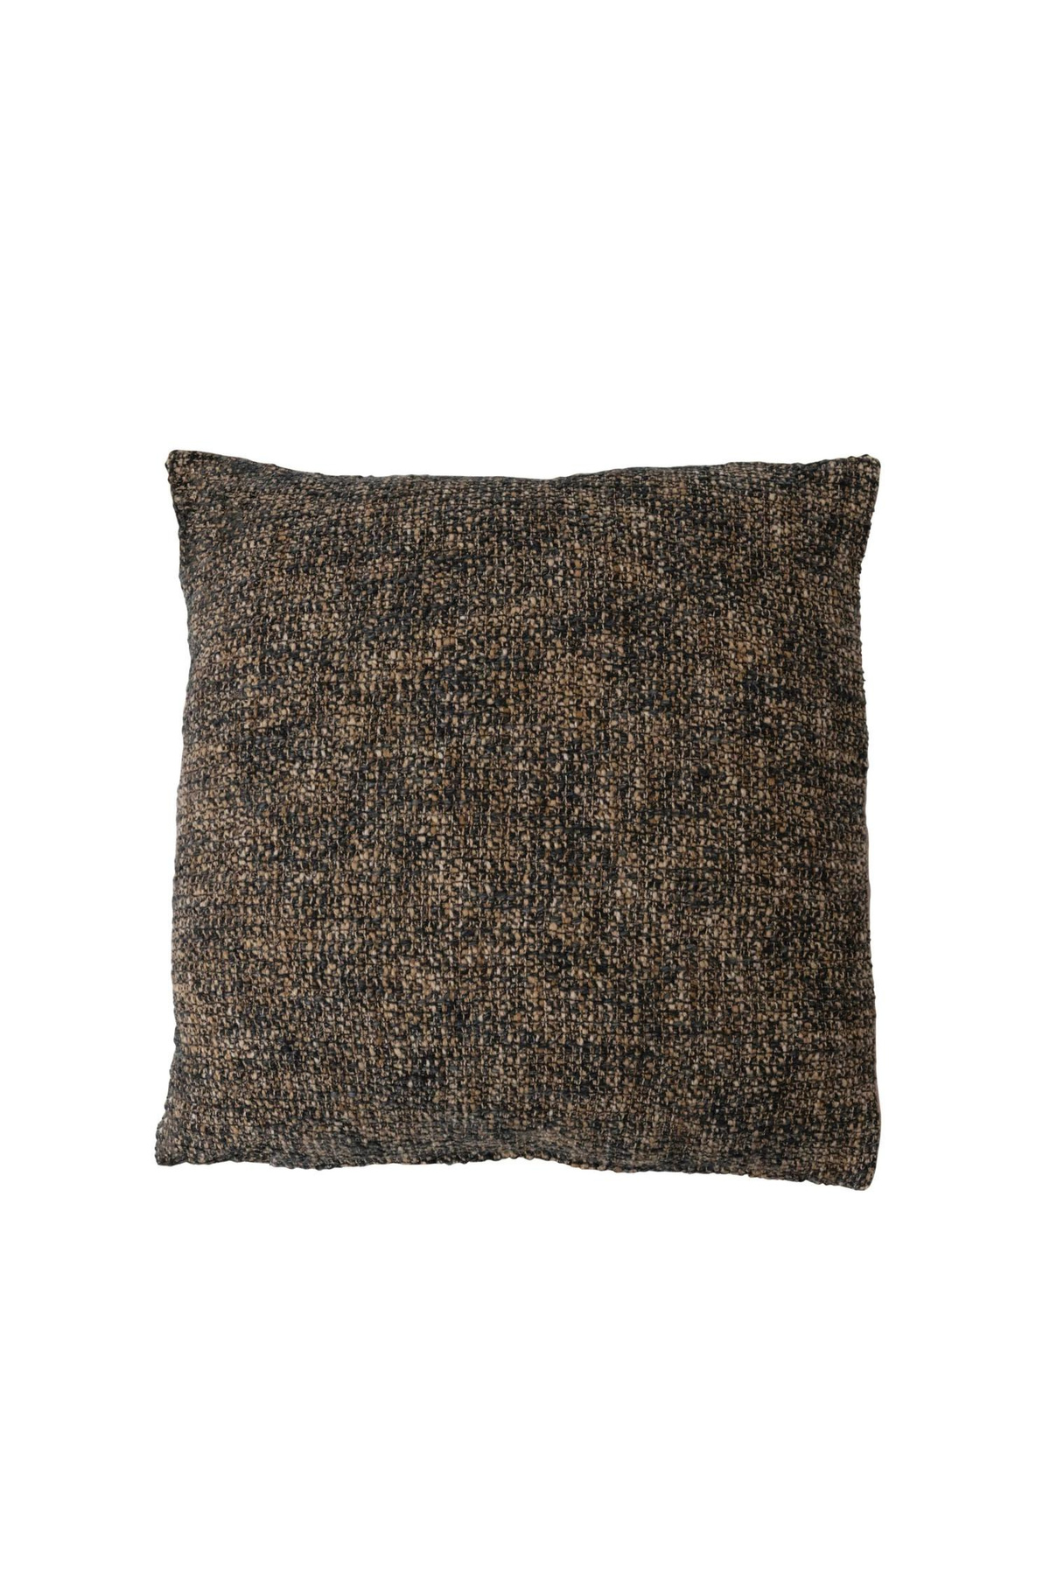 Comfy Fall Pillows and Throws - Domestically Creative